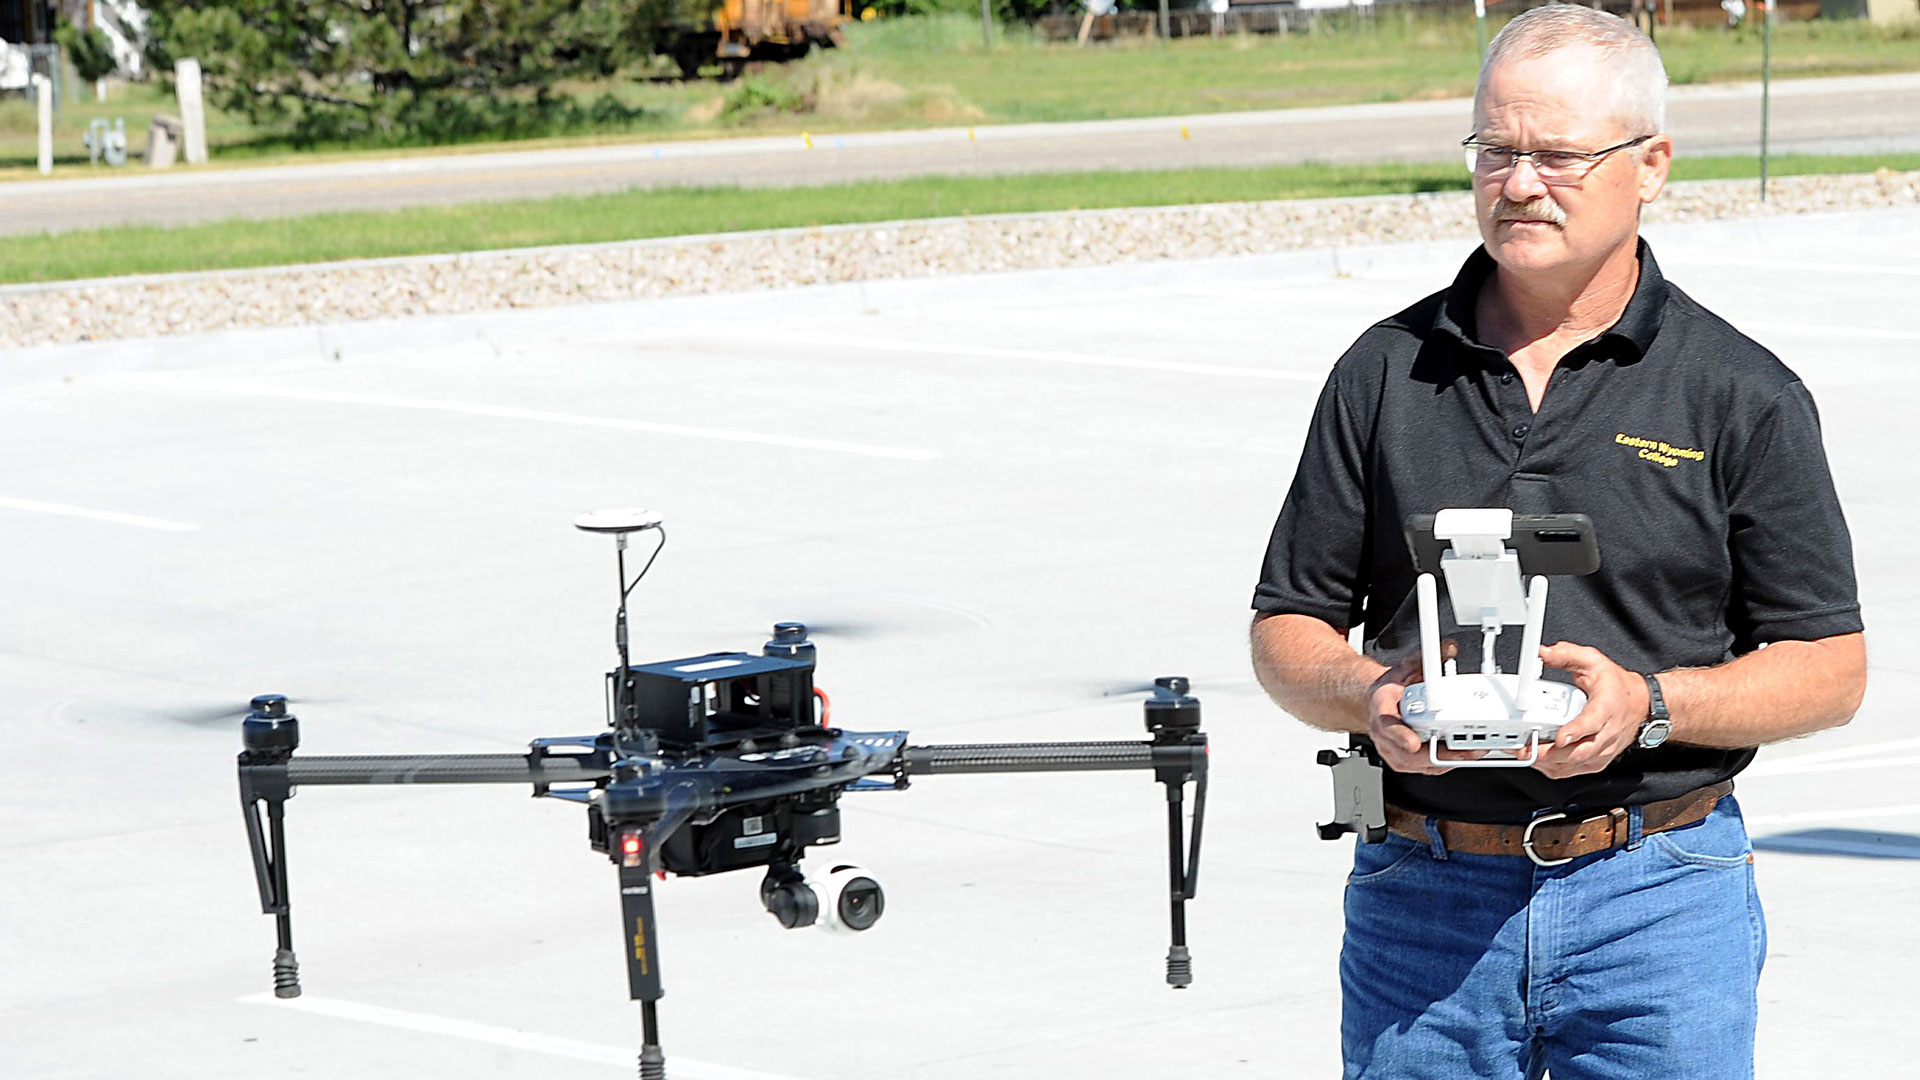 Eastern Wyoming College professor Matt Scott flies a DJI Matrice 100 drone.  It is an expandable platform drone that can have different payloads or sensors added to it to increase its versatility. drone on the EWC campus. Drones allow for more detailed data making the decisions needed for those working in the field of precision agriculture.